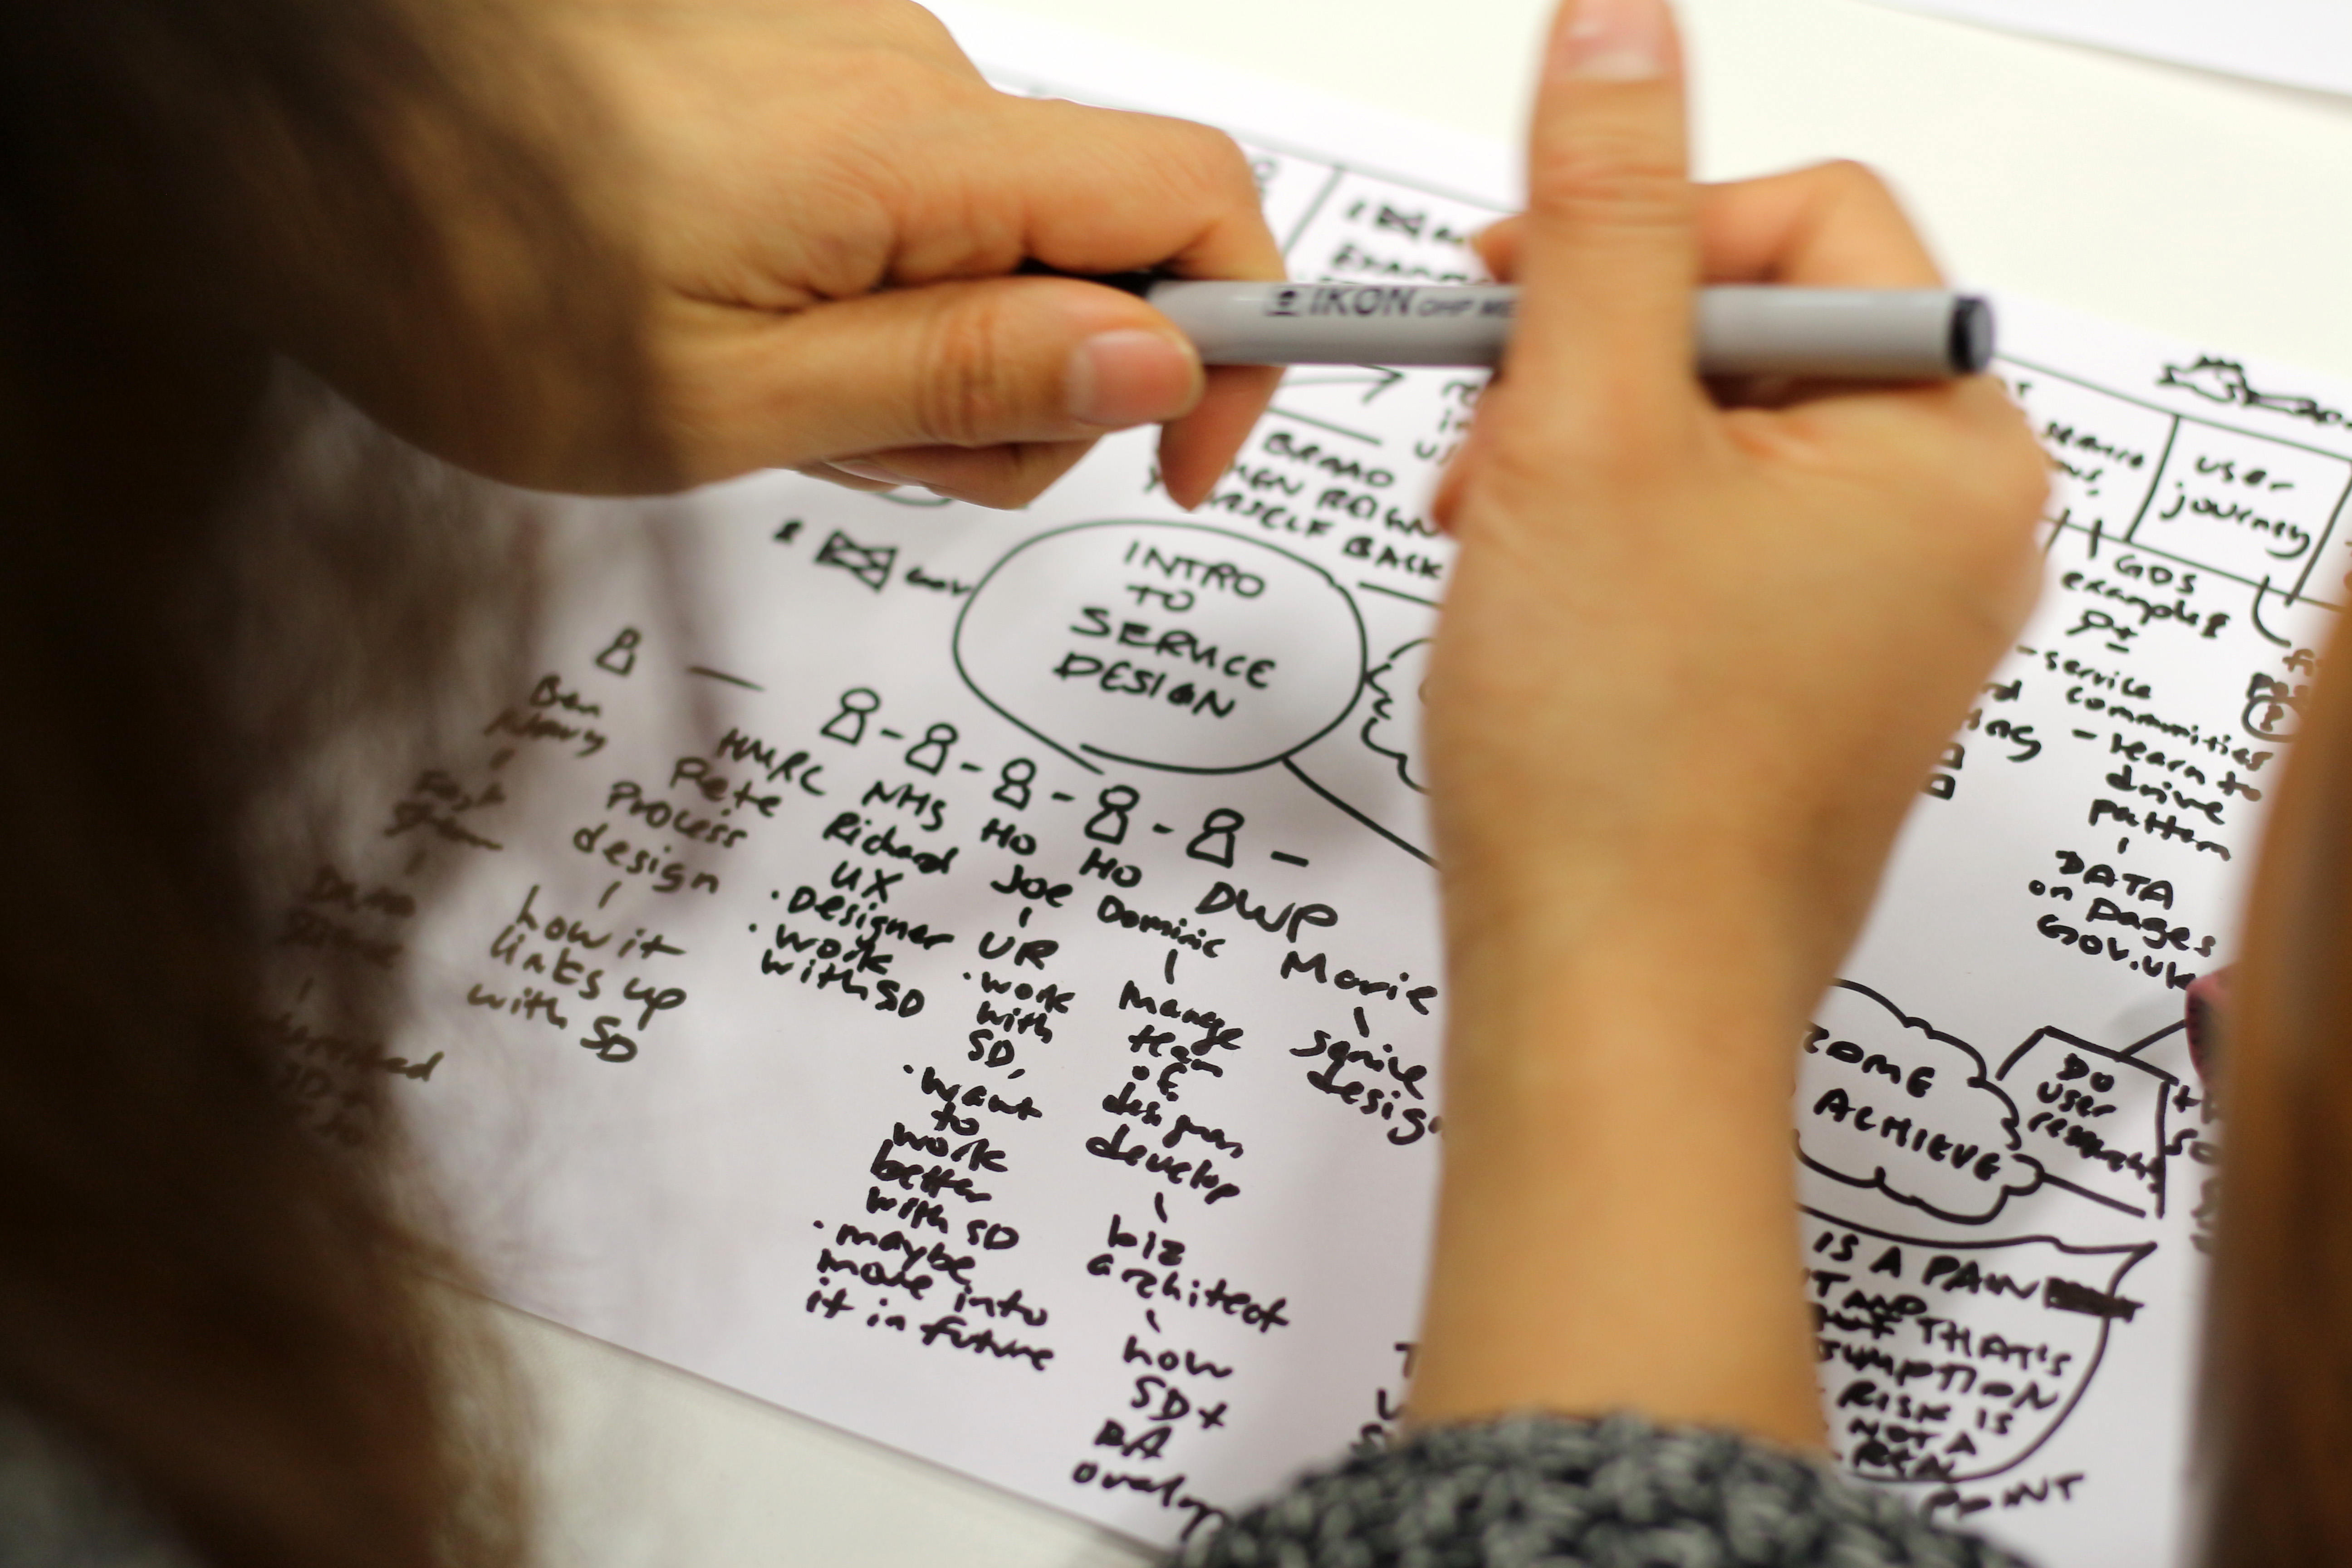 A photo over the shoulder of a person, holding a pen, drawing a mind map or sketch notes on a page, with "Intro to service design" written in the middle. The person has olive skin and wavy brown hair. 